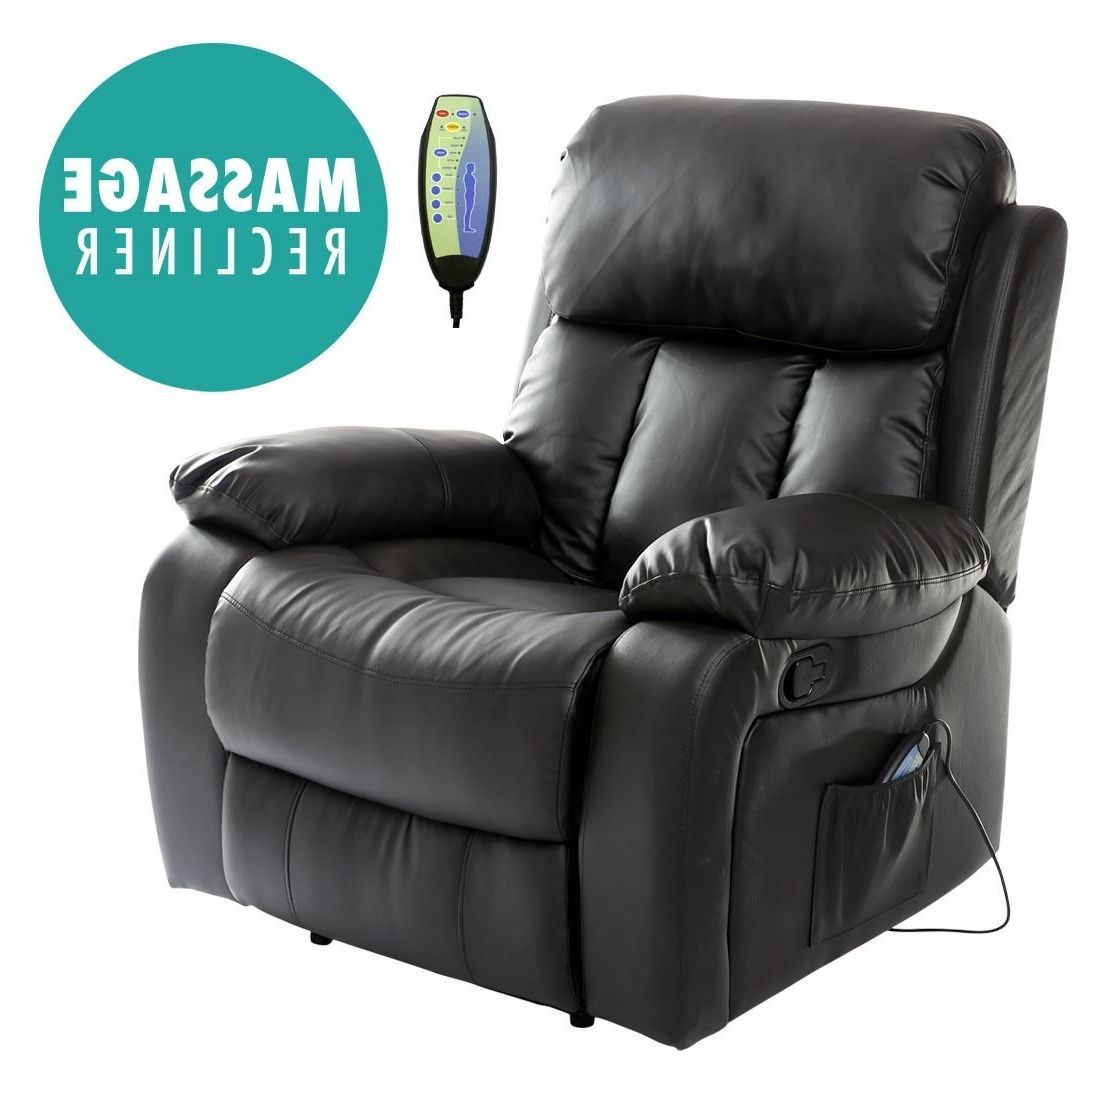 Fashionable Gaming Sofa Chairs Within Home Decor: Fetching Massage Recliner Chairs And Chester Heated (View 3 of 20)